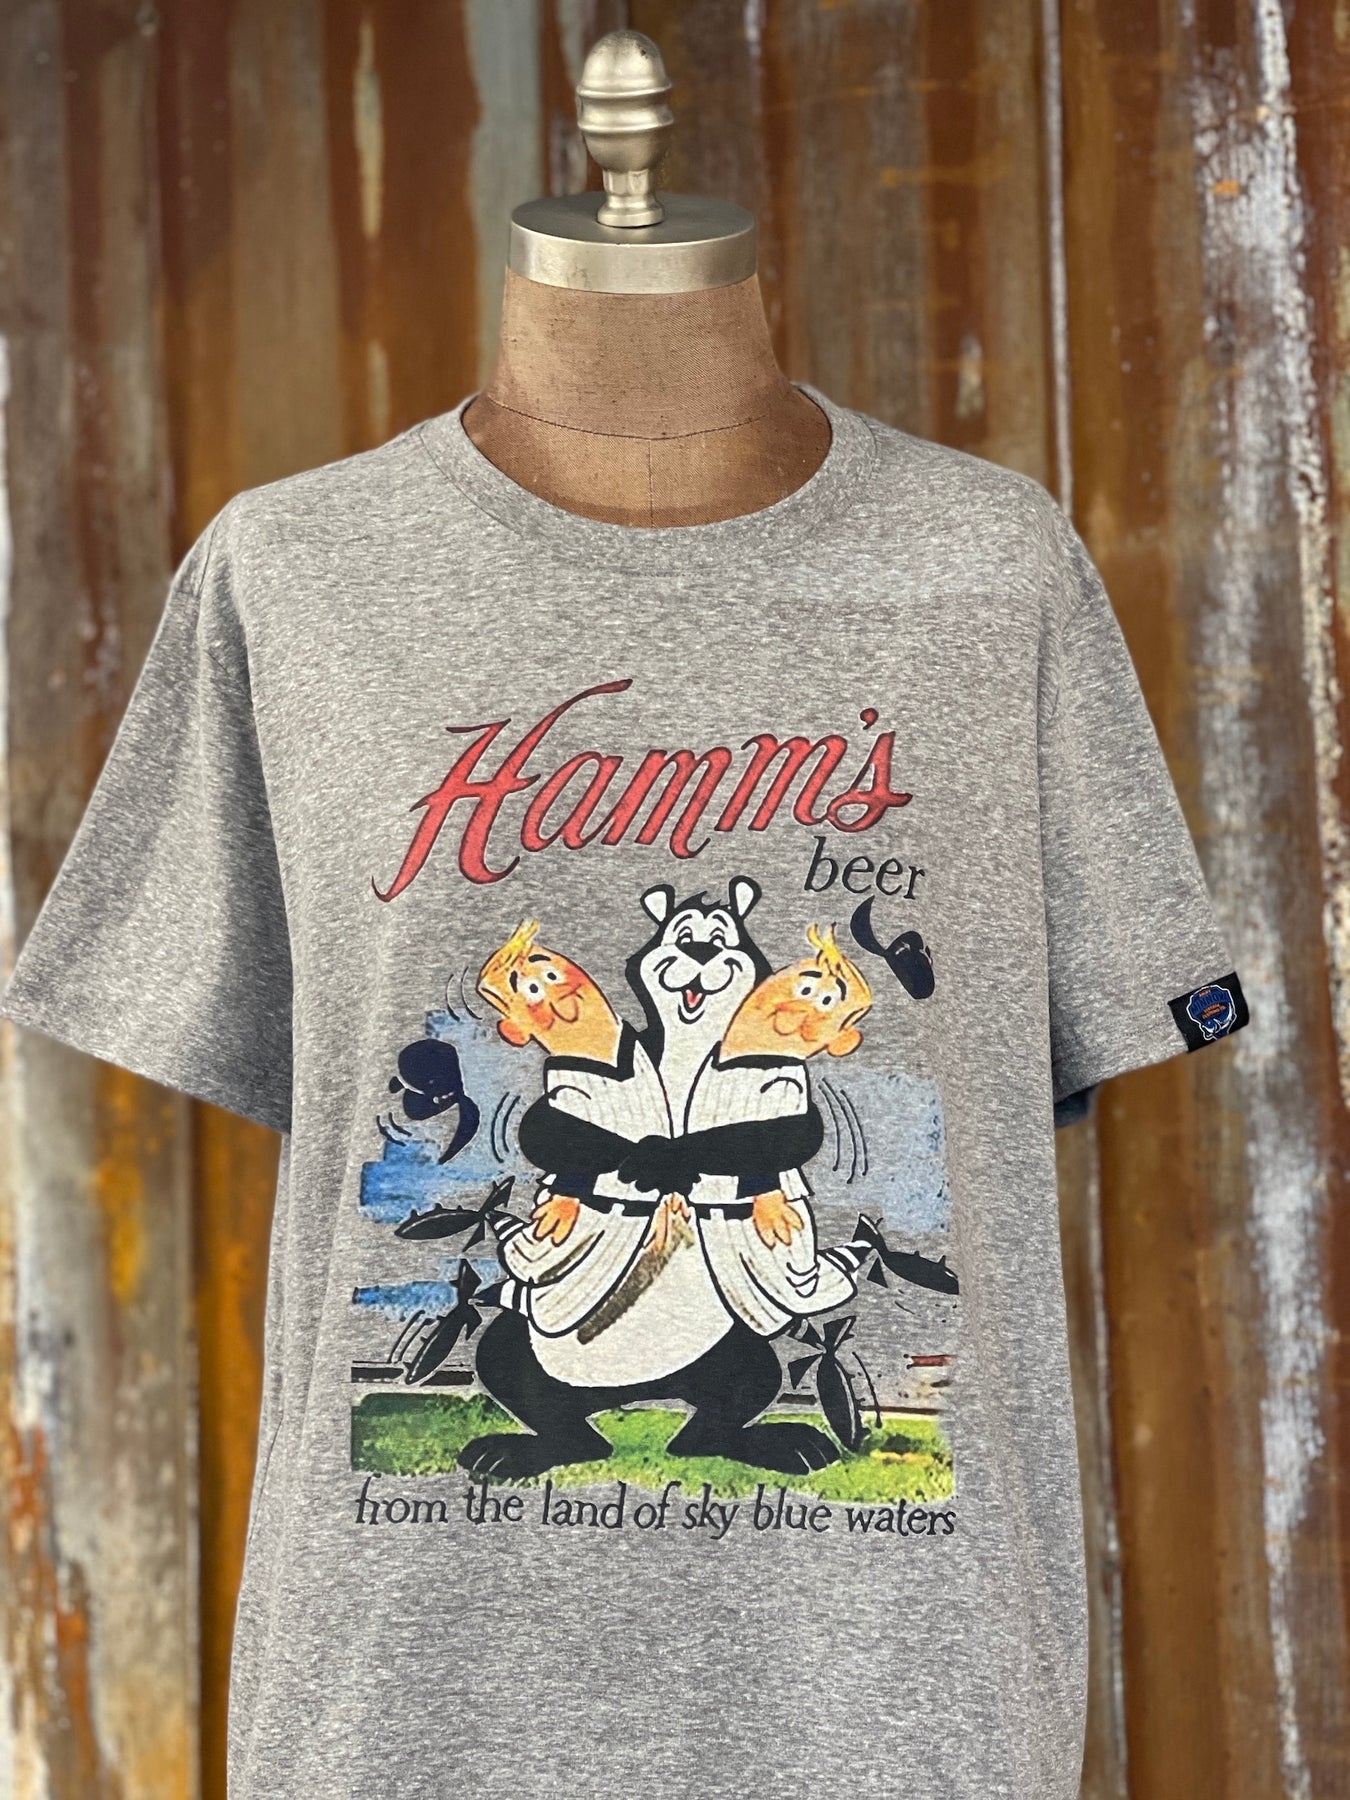 Vintage Old Time Hockey Looney Tunes Shirt - High-Quality Printed Brand